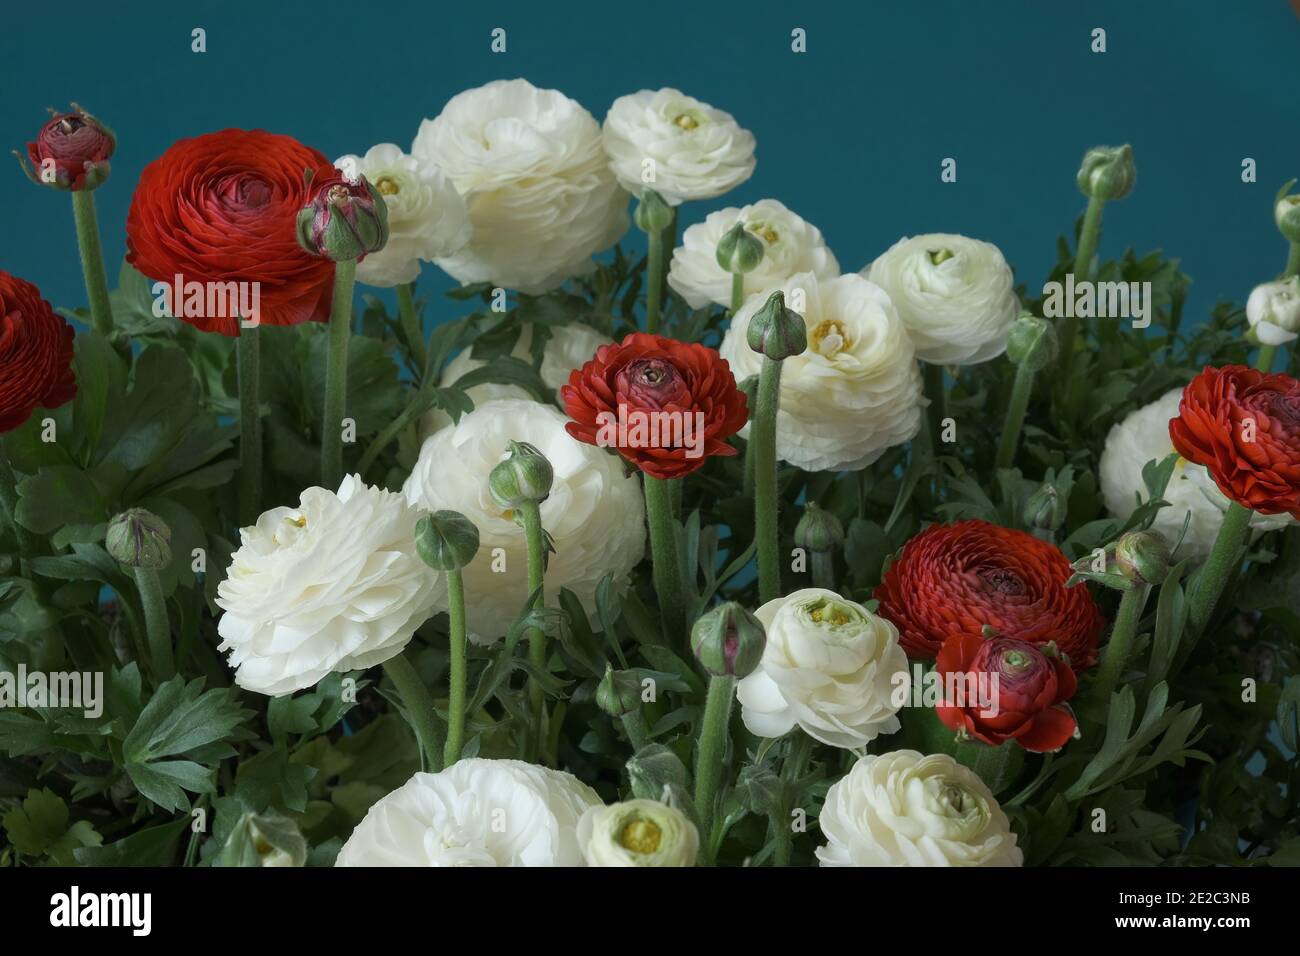 ranunculus bouquet close-up background.Spring flowers. Buttercups flower. White and red ranunculus flower bouquet on blue background. International Stock Photo